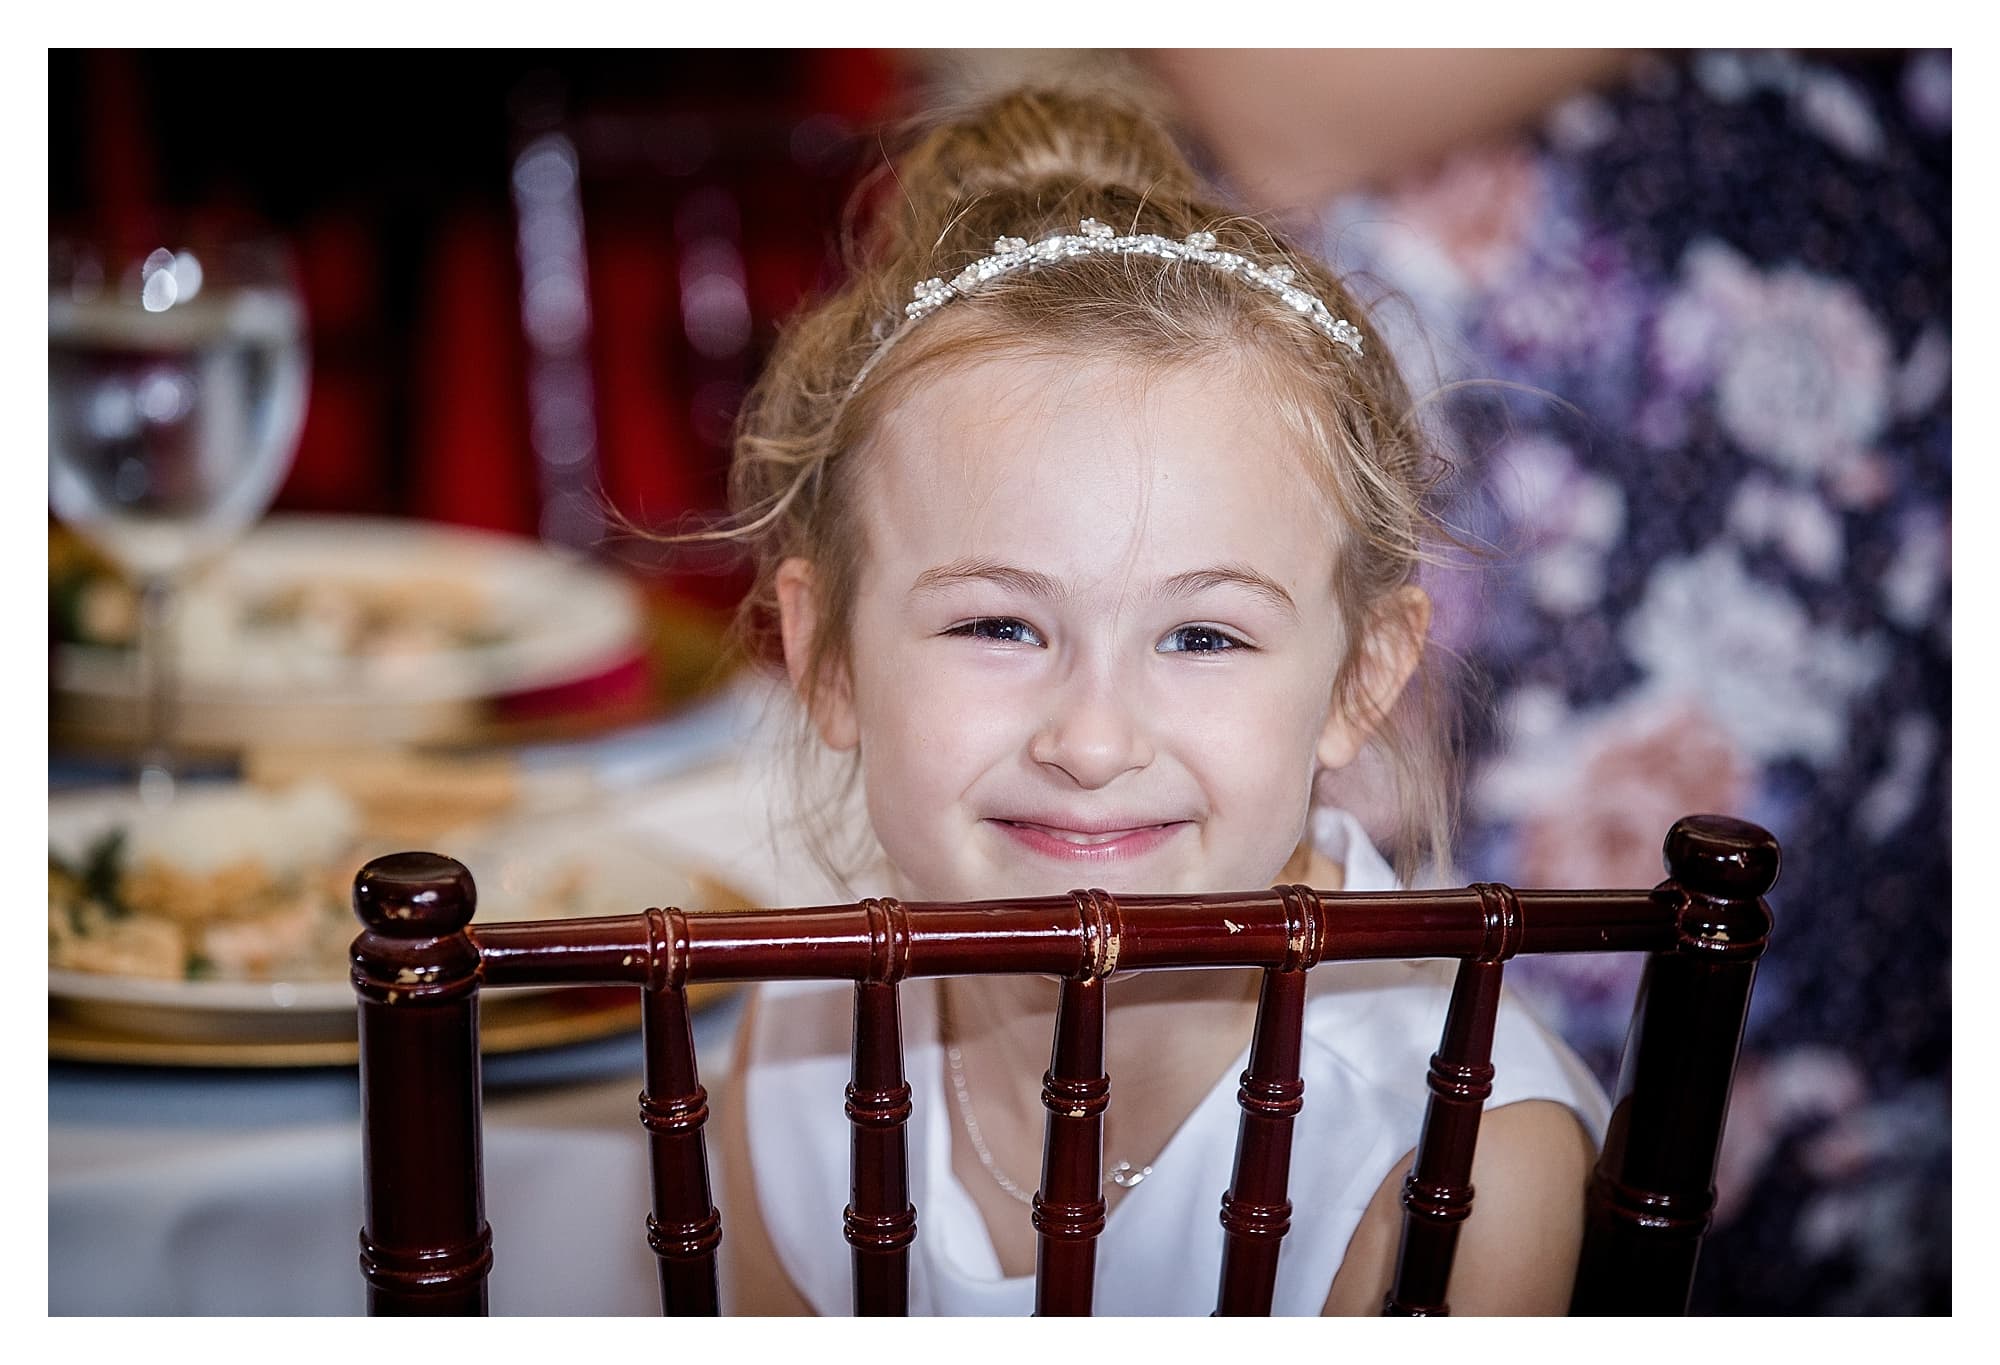 Smiling girl at wedding reception, photography by Kathy Beaver